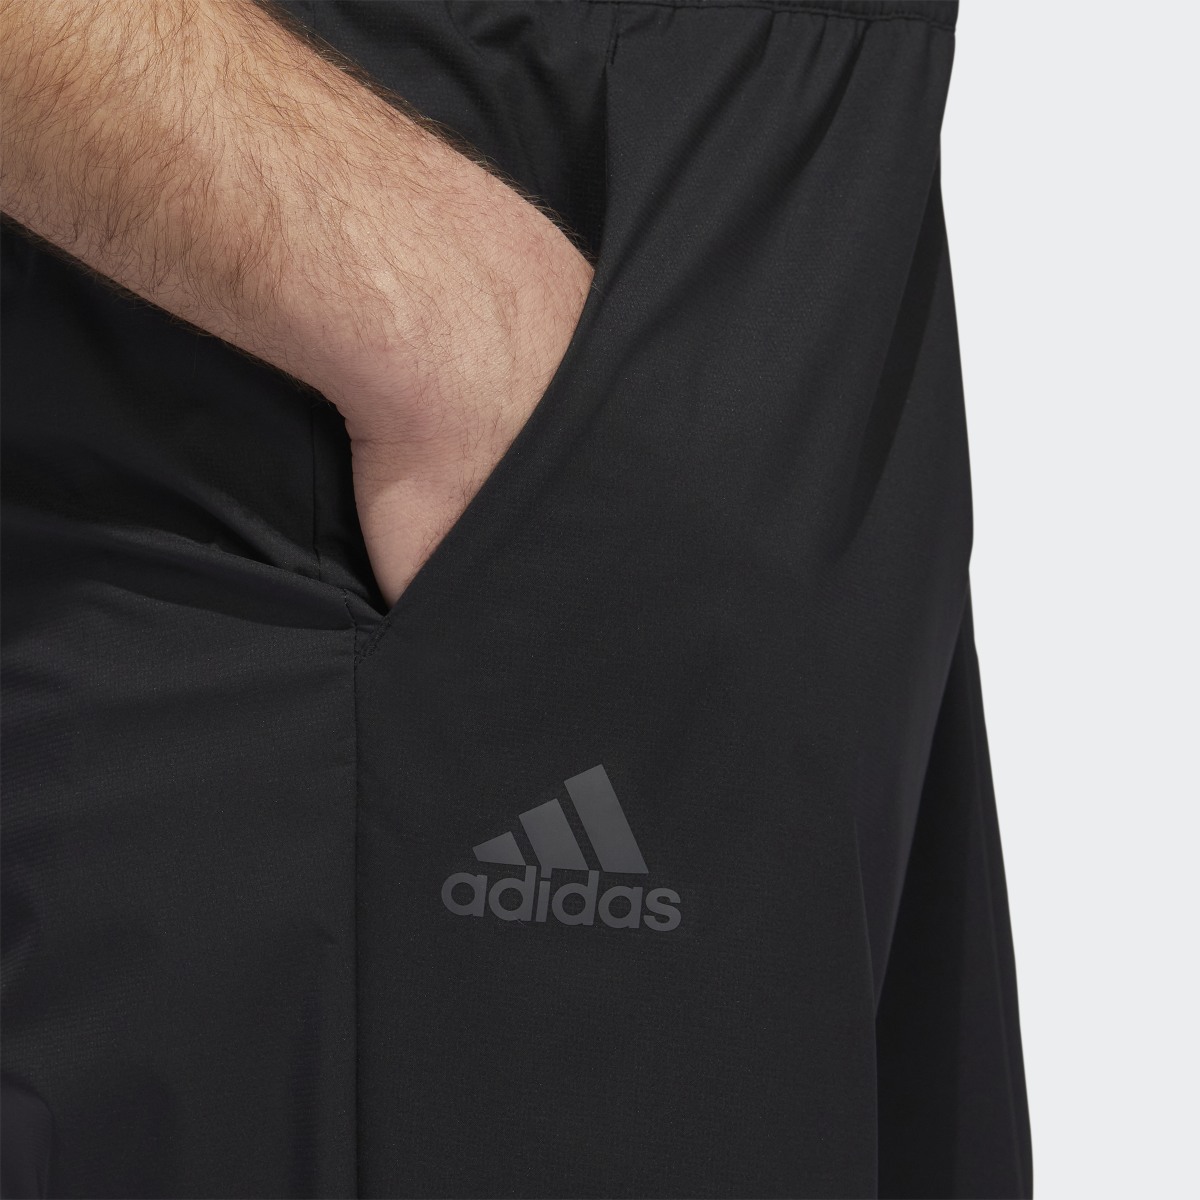 Adidas Provisional Golf Tracksuit Bottoms. 6